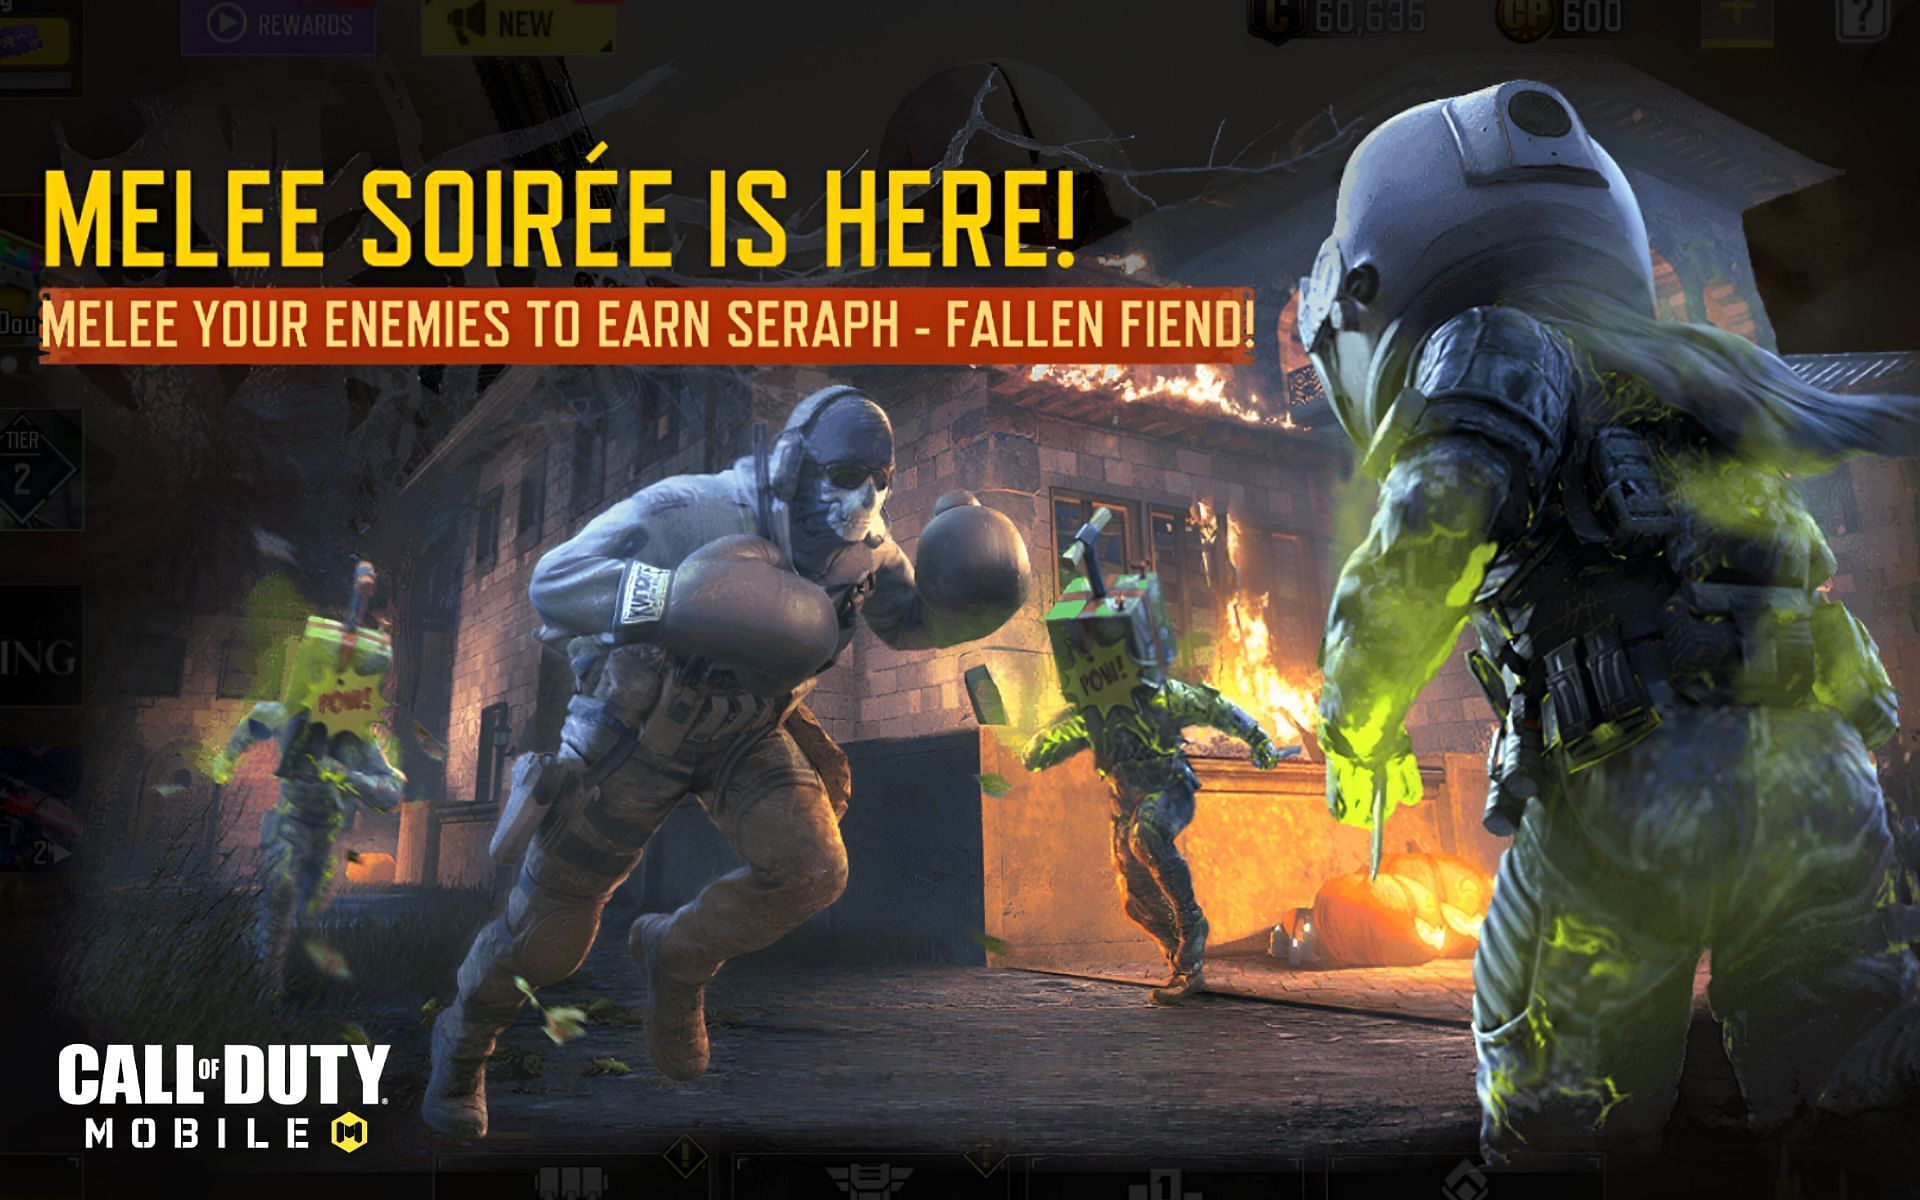 Get free rewards via the latest Call of Duty Mobile featured event (Image via Activision)